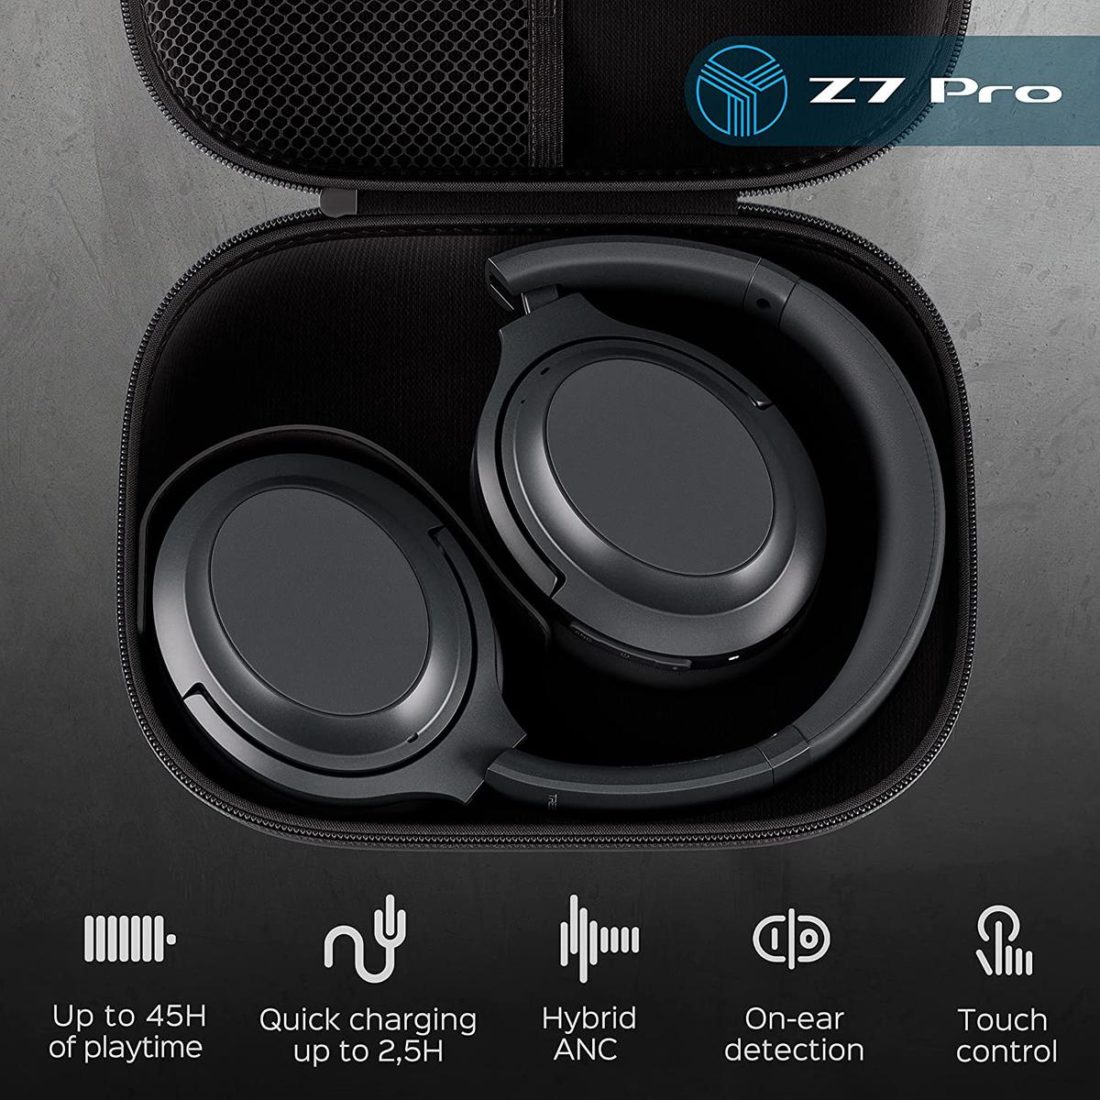 The Treblab Z7 Pro's features and specs.